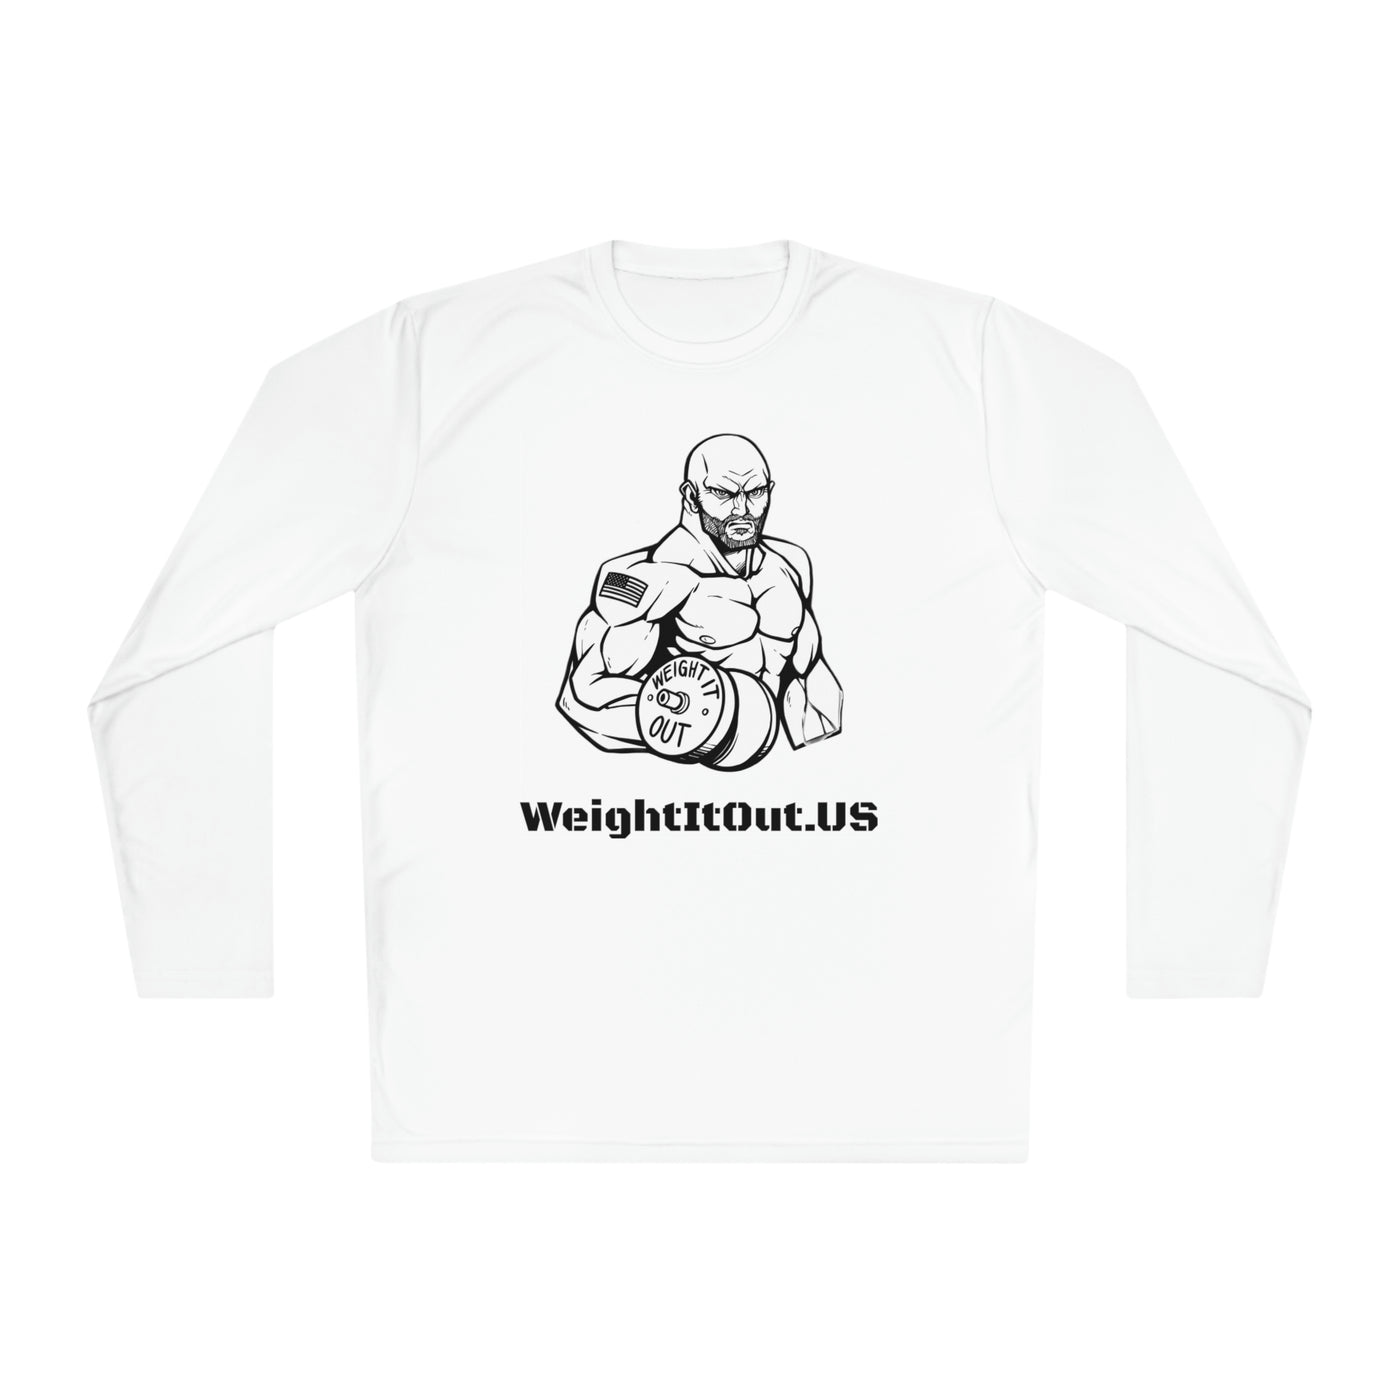 Weight It Out Long Sleeve Tee